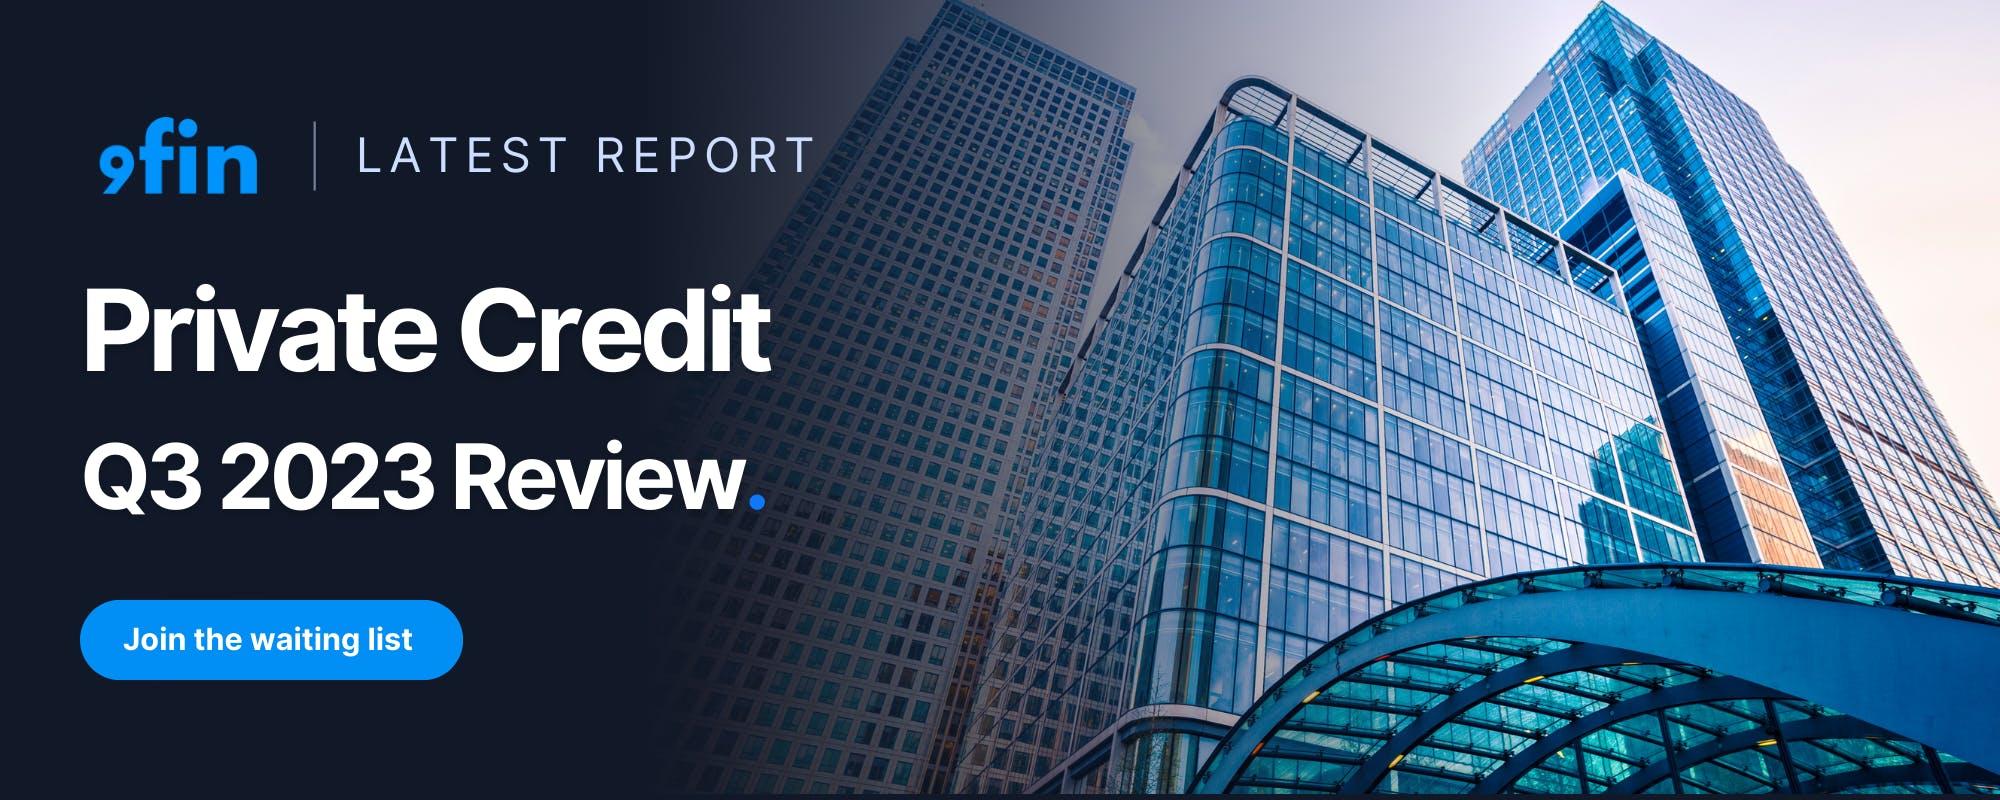 9fin's Private Credit Q3 2023 Review